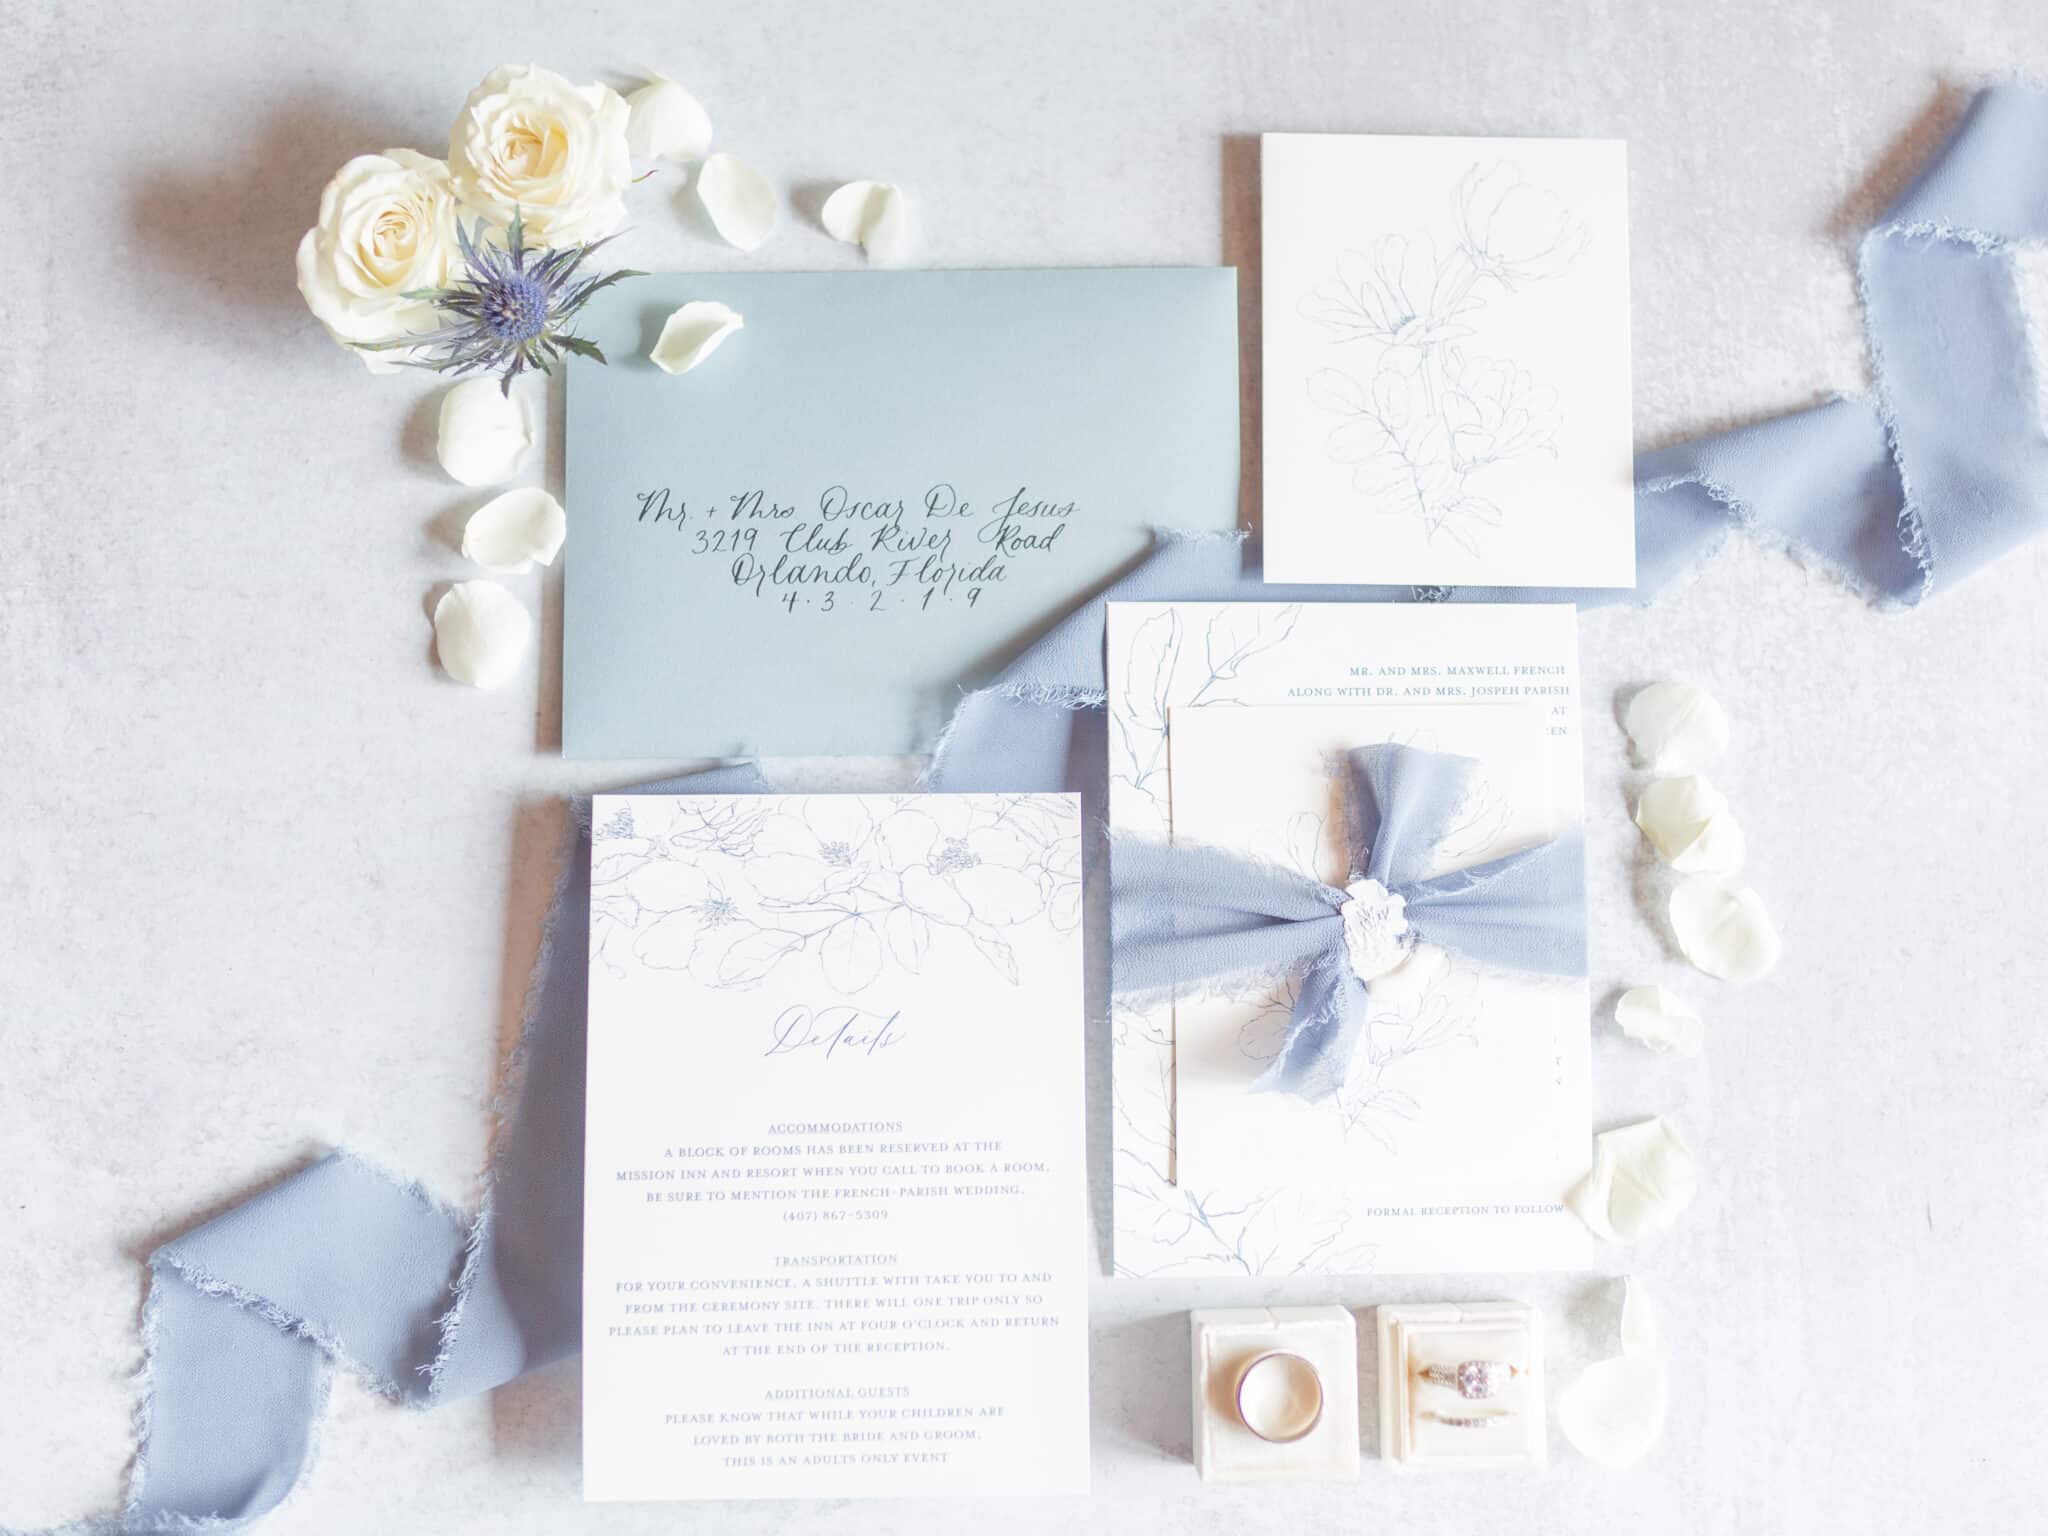 event stationary with invitation envelop and other items with hand calligraphy and dusty blue ribbon with ring boxes and flower petals